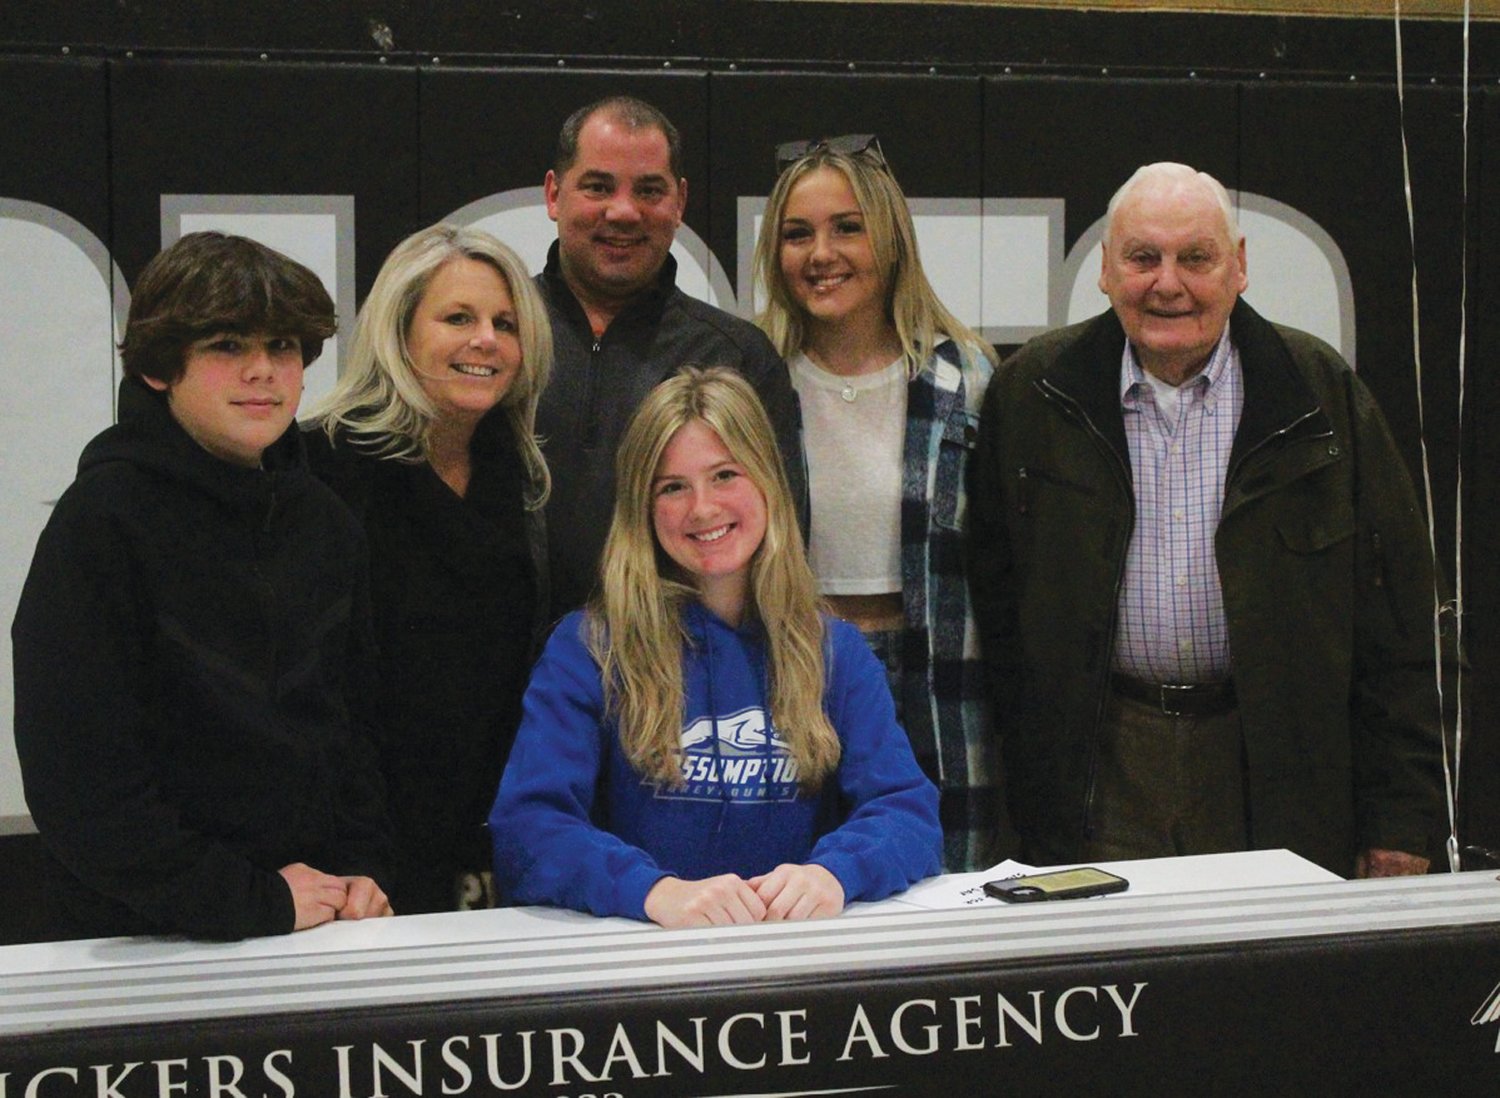 FUTURE GREYHOUND: Gillian Brown signs her NLI alongside her family last week. (Photos by Alex Sponseller)